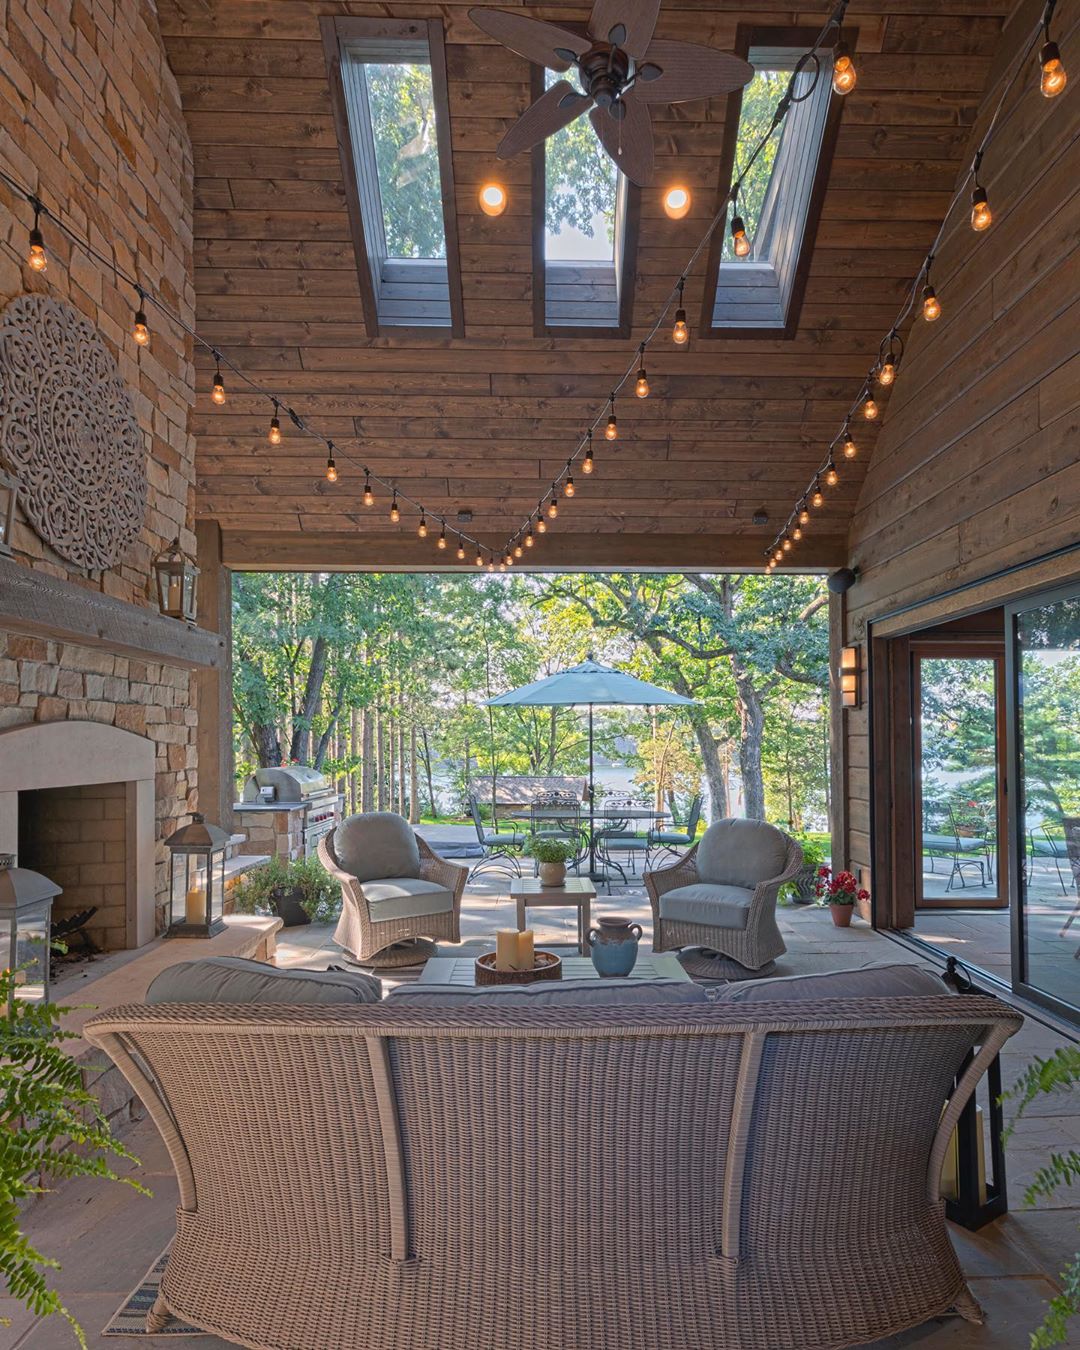 Interior of enclosed patio at a Wisconsin vacation home. Photo by Instagram user @wisconsinloghomes